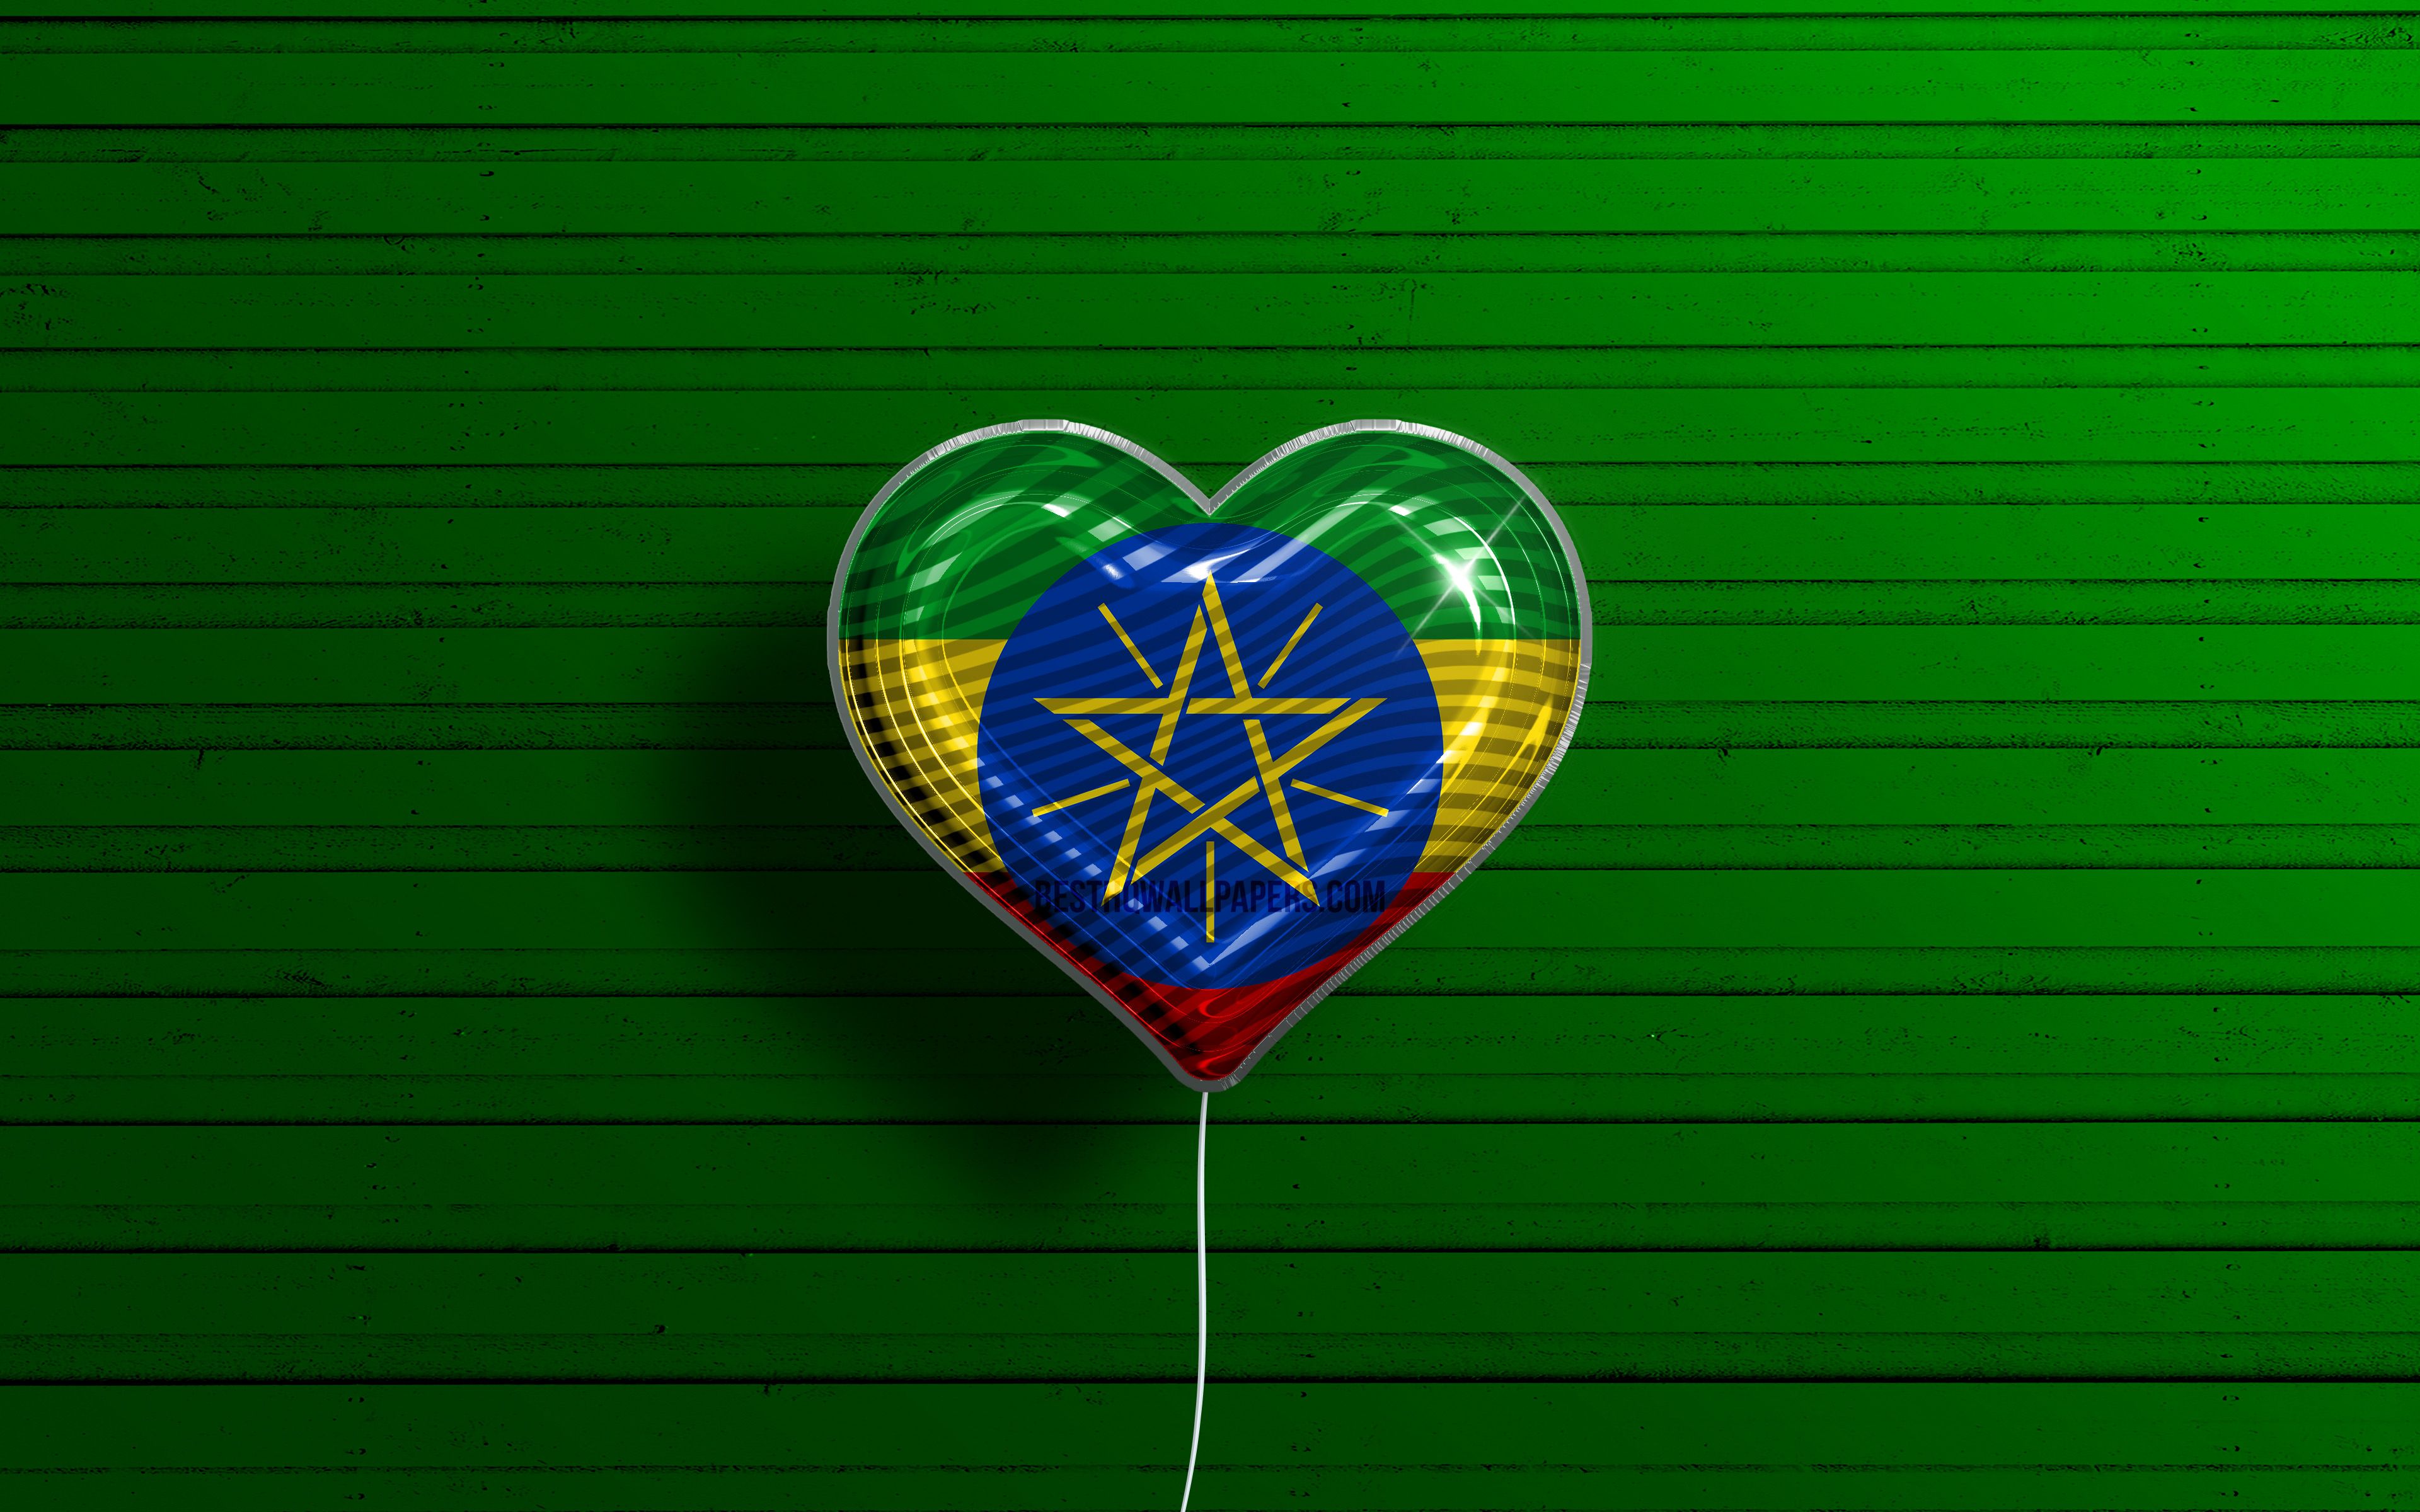 Download wallpaper I Love Ethiopia, 4k, realistic balloons, green wooden background, African countries, Ethiopian flag heart, favorite countries, flag of Ethiopia, balloon with flag, Ethiopian flag, Uganda, Love Ethiopia for desktop with